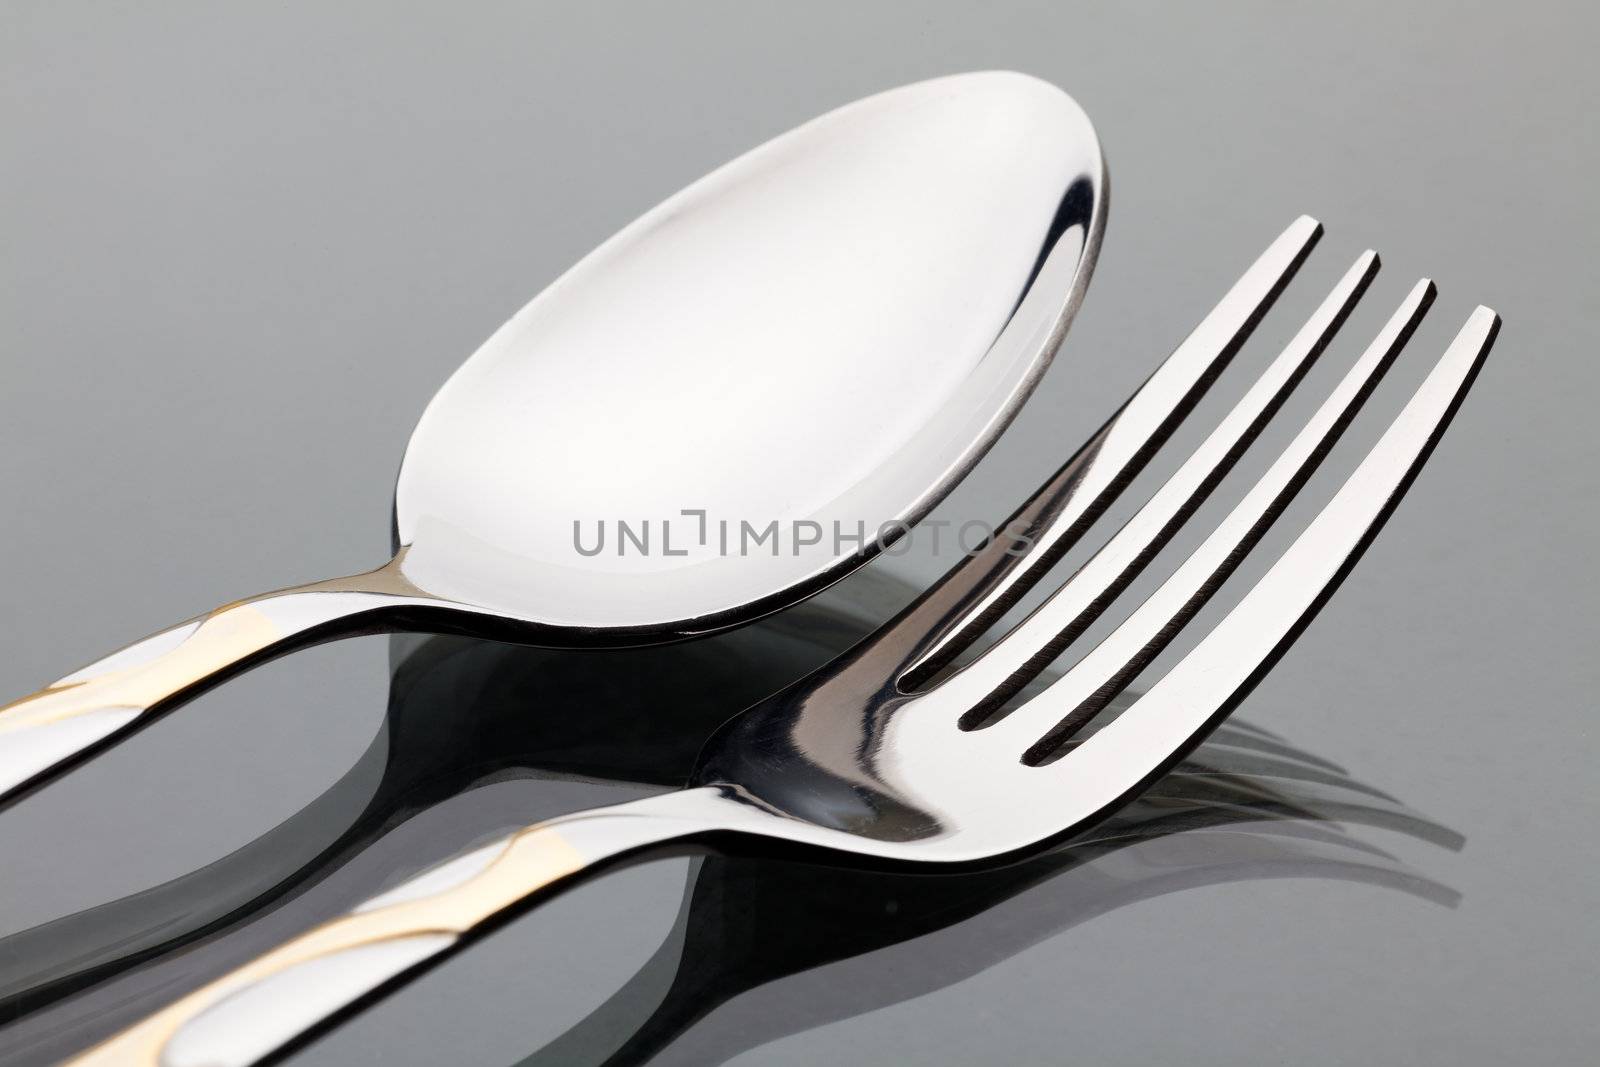 Spoon and fork are on the glass desk. Close-up